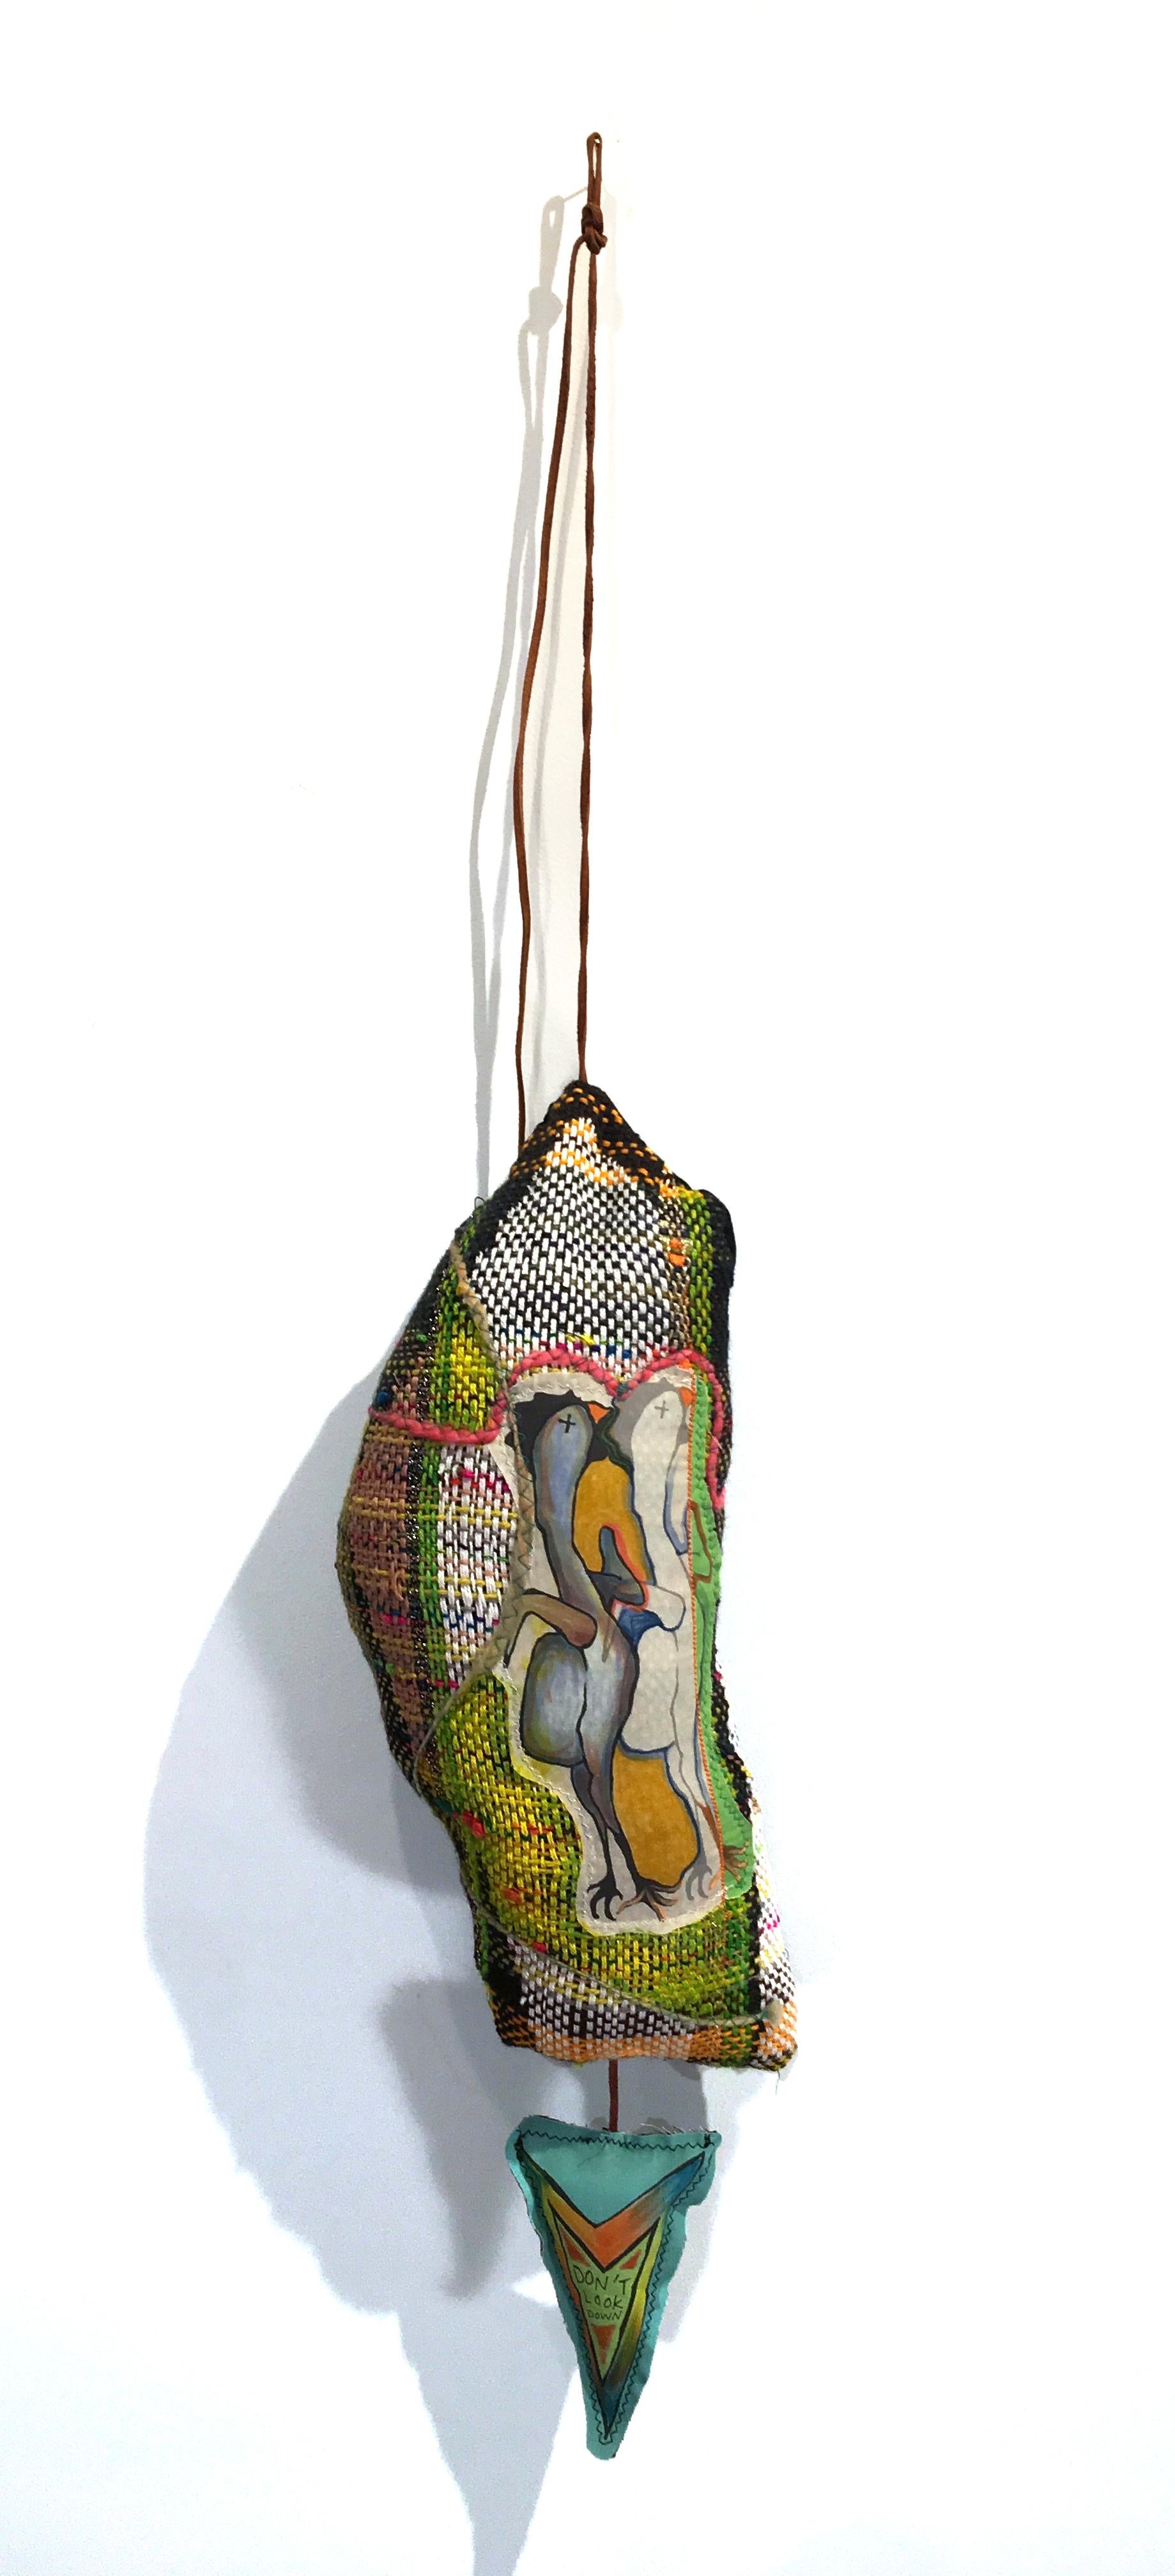 Handwoven Textile Wall Hanging: 'Hanging' 1